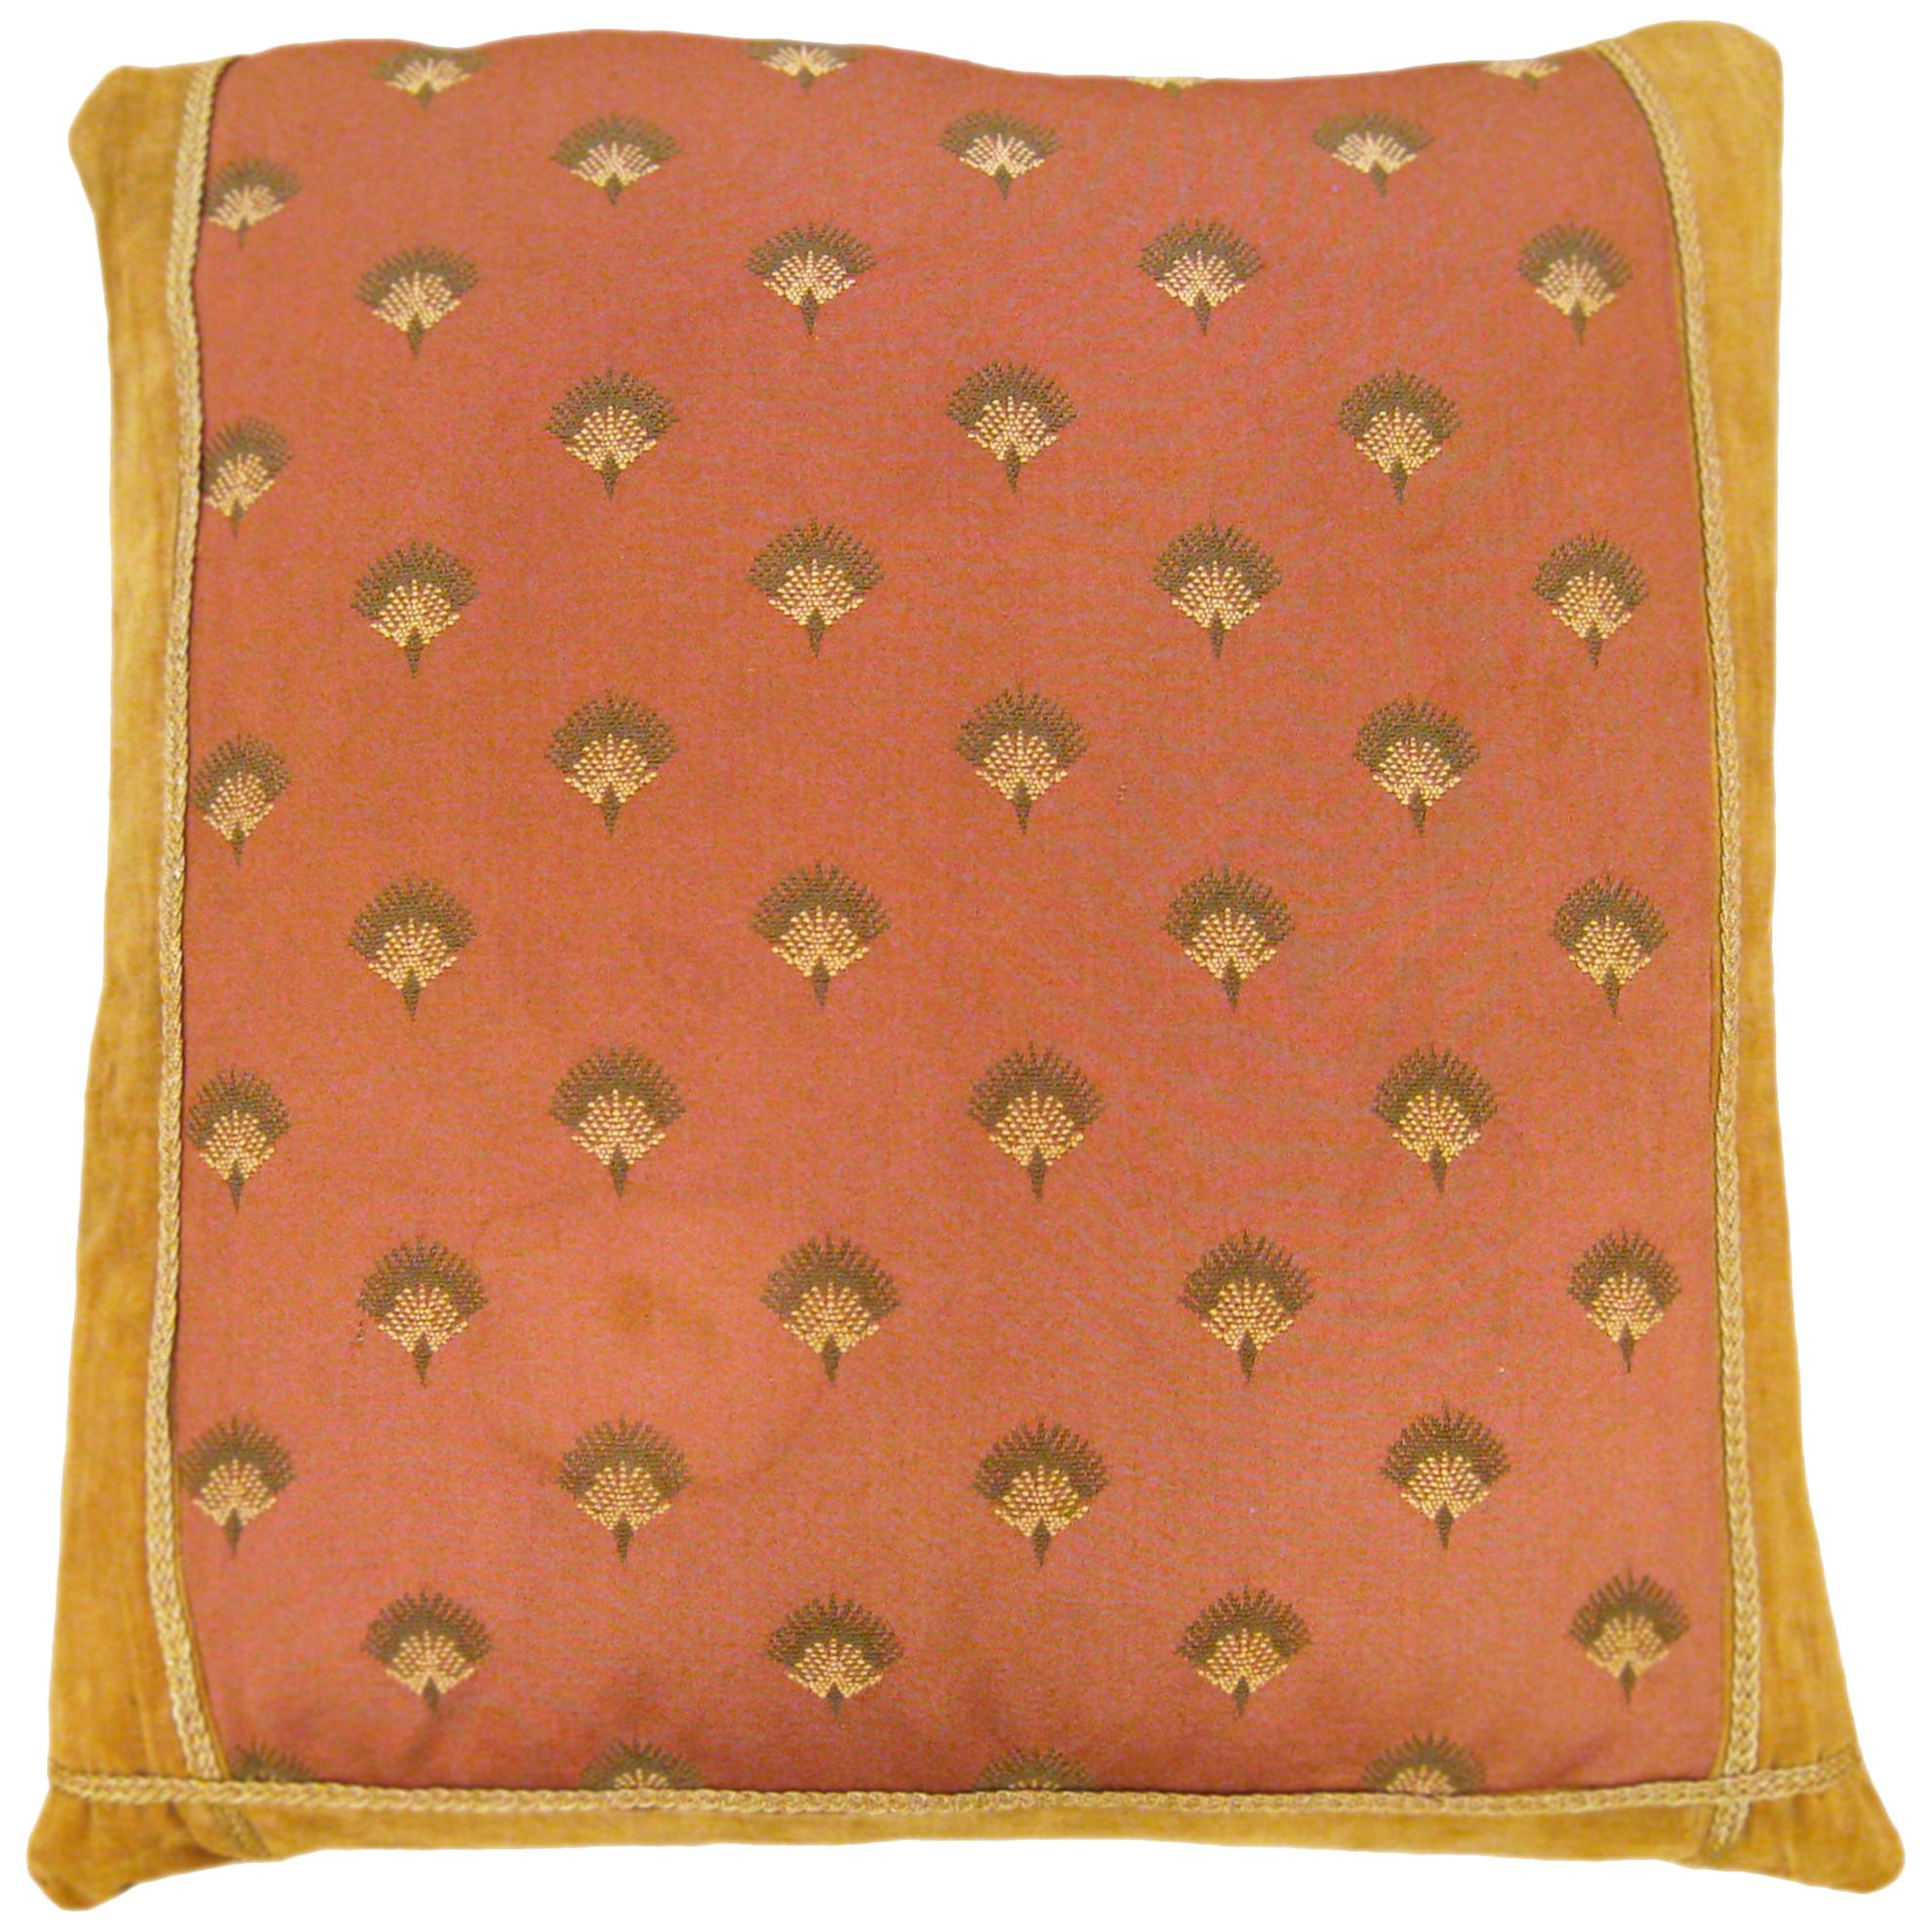 Vintage Decorative European Textile Pillow with Velvet and Striped Fabric